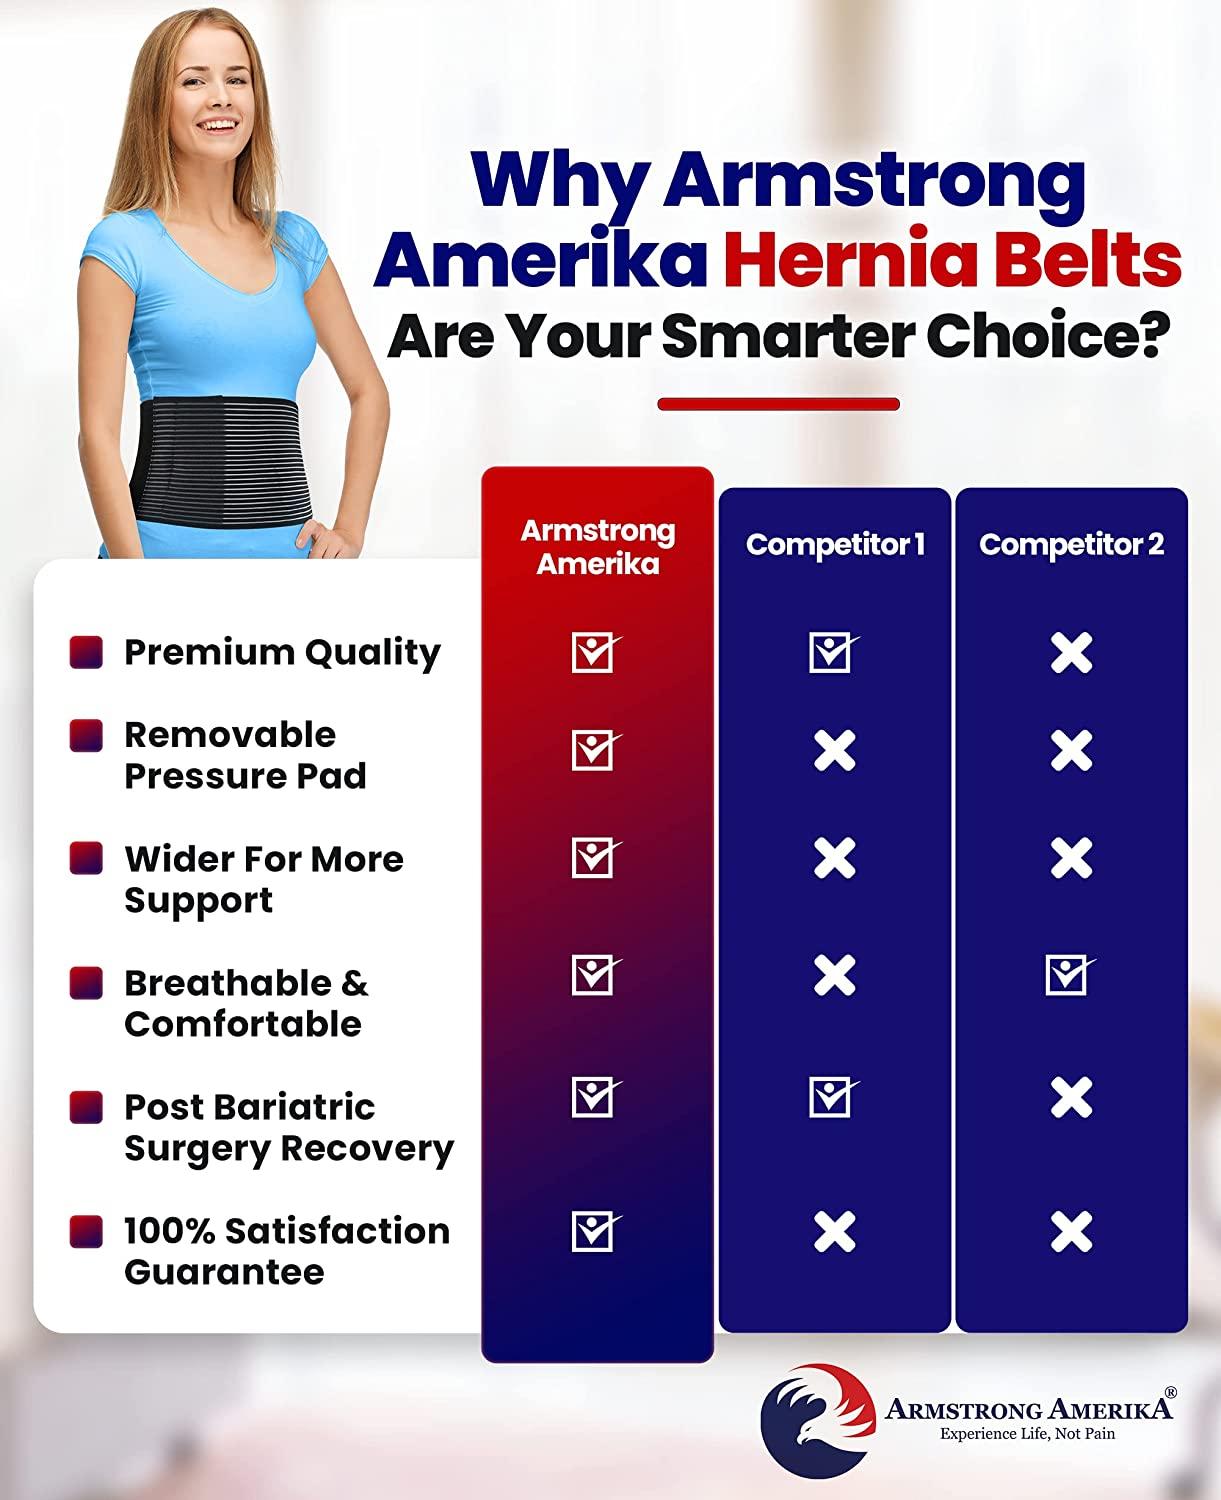 BACK, NECK OR MULTI BODY PART PAIN RELIEF - Armstrong Amerika